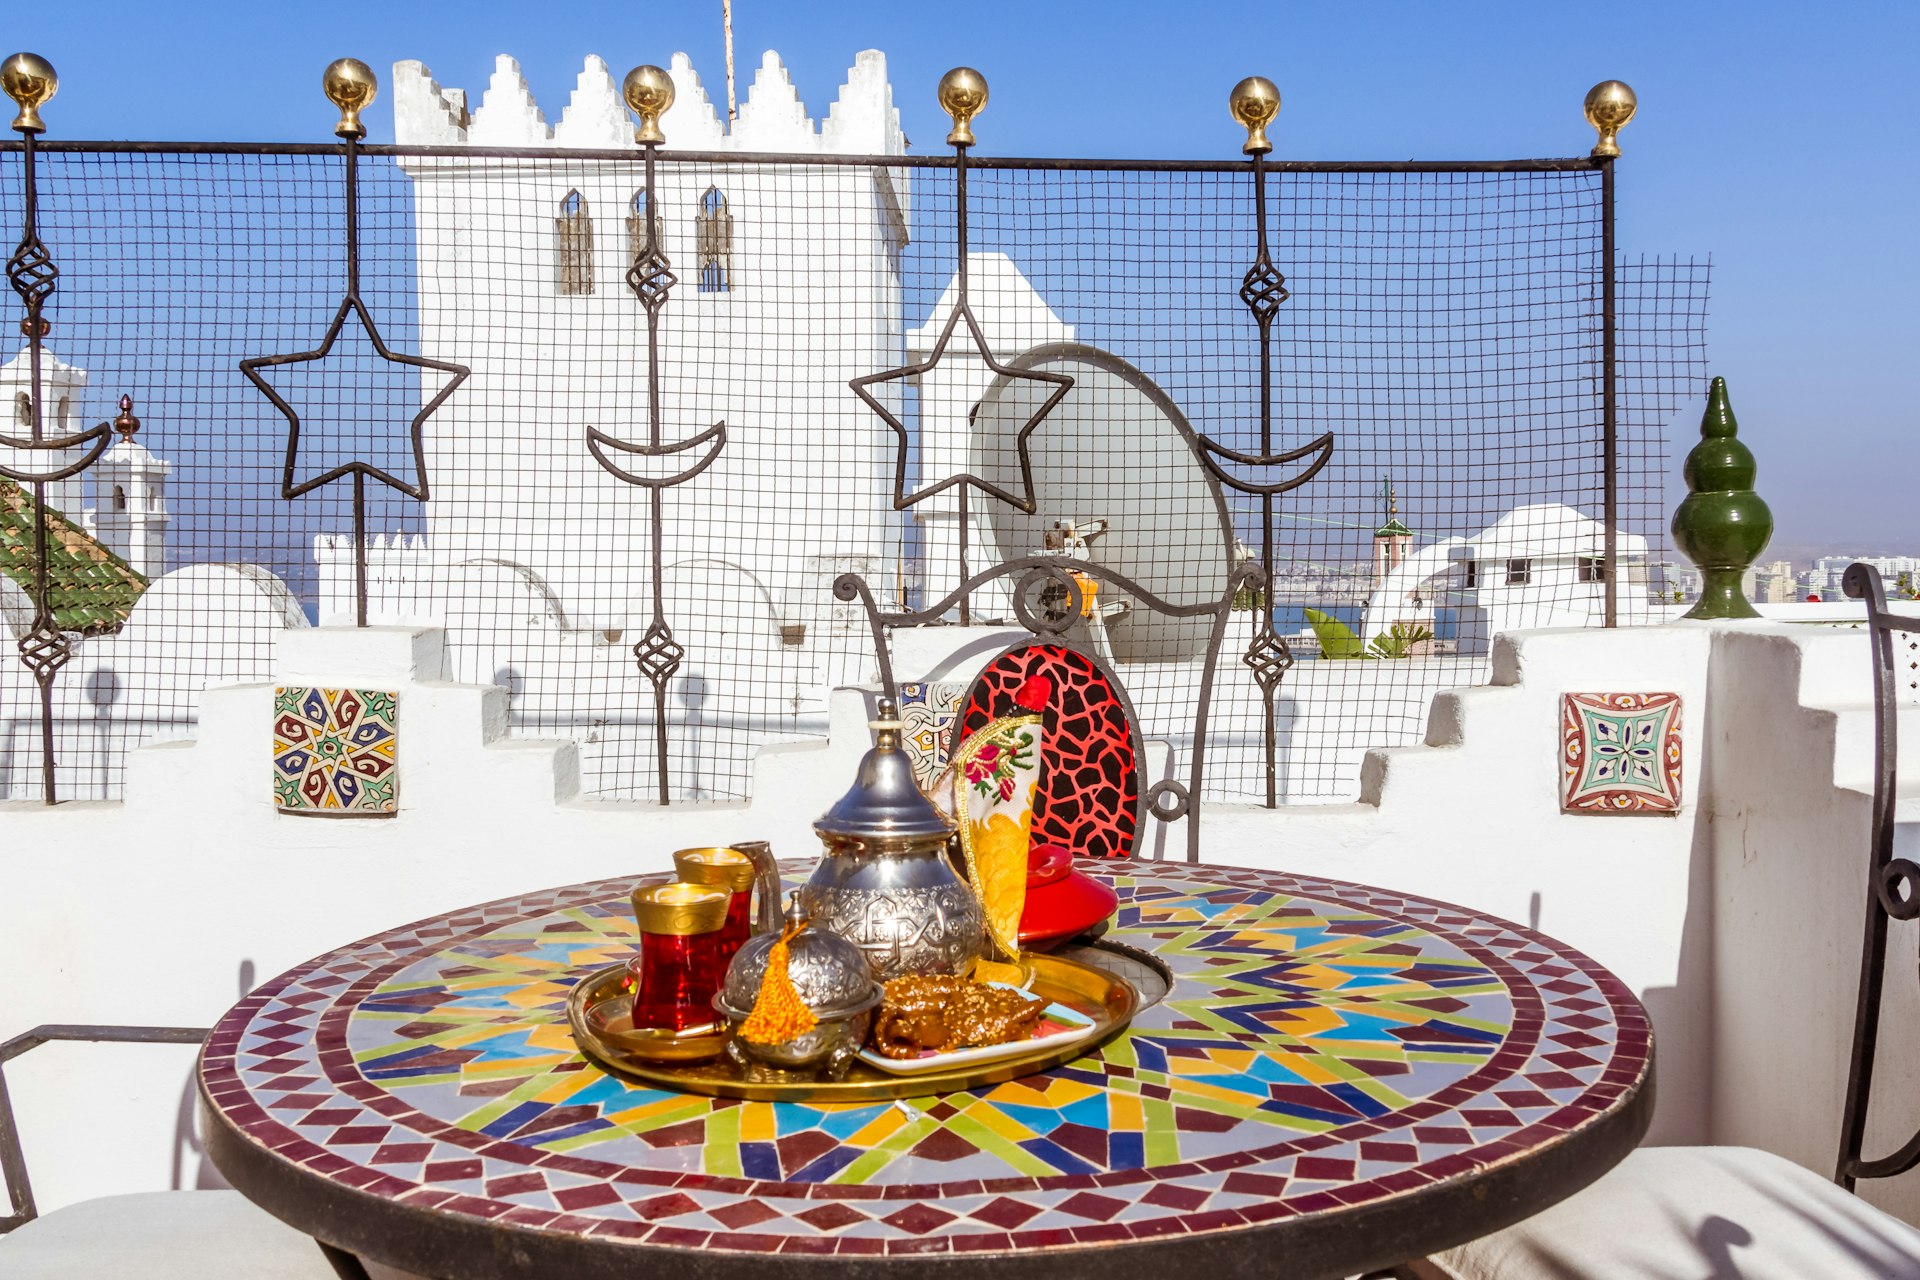 Tea service on a terrace in the kasbah of Tangier